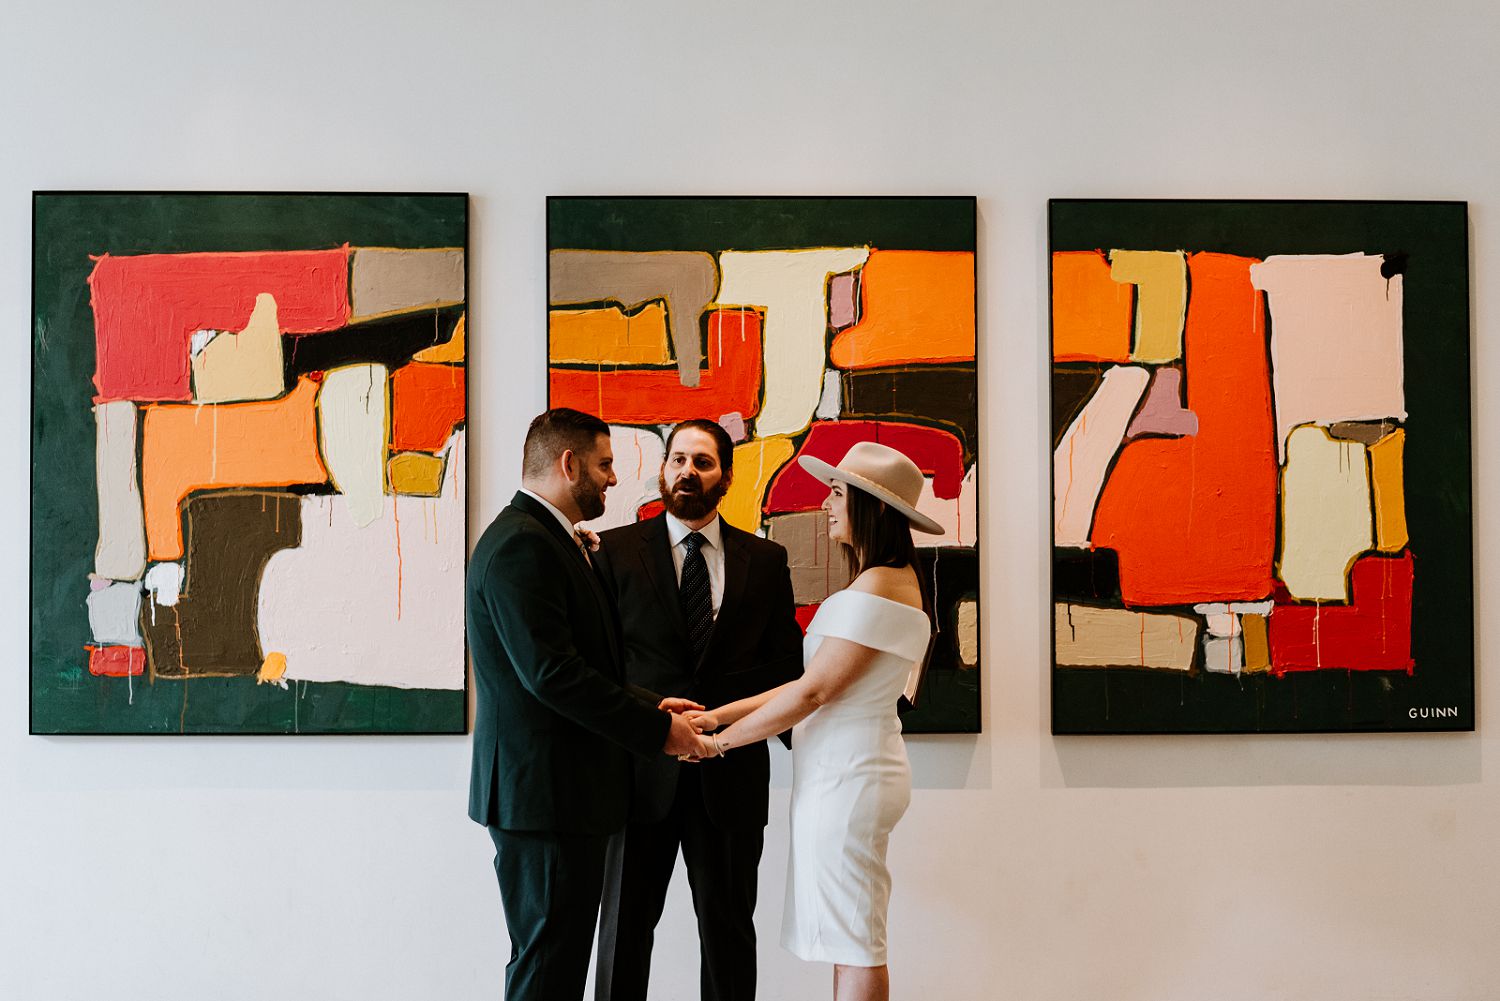 South Congress Hotel Intimate Elopement in Austin